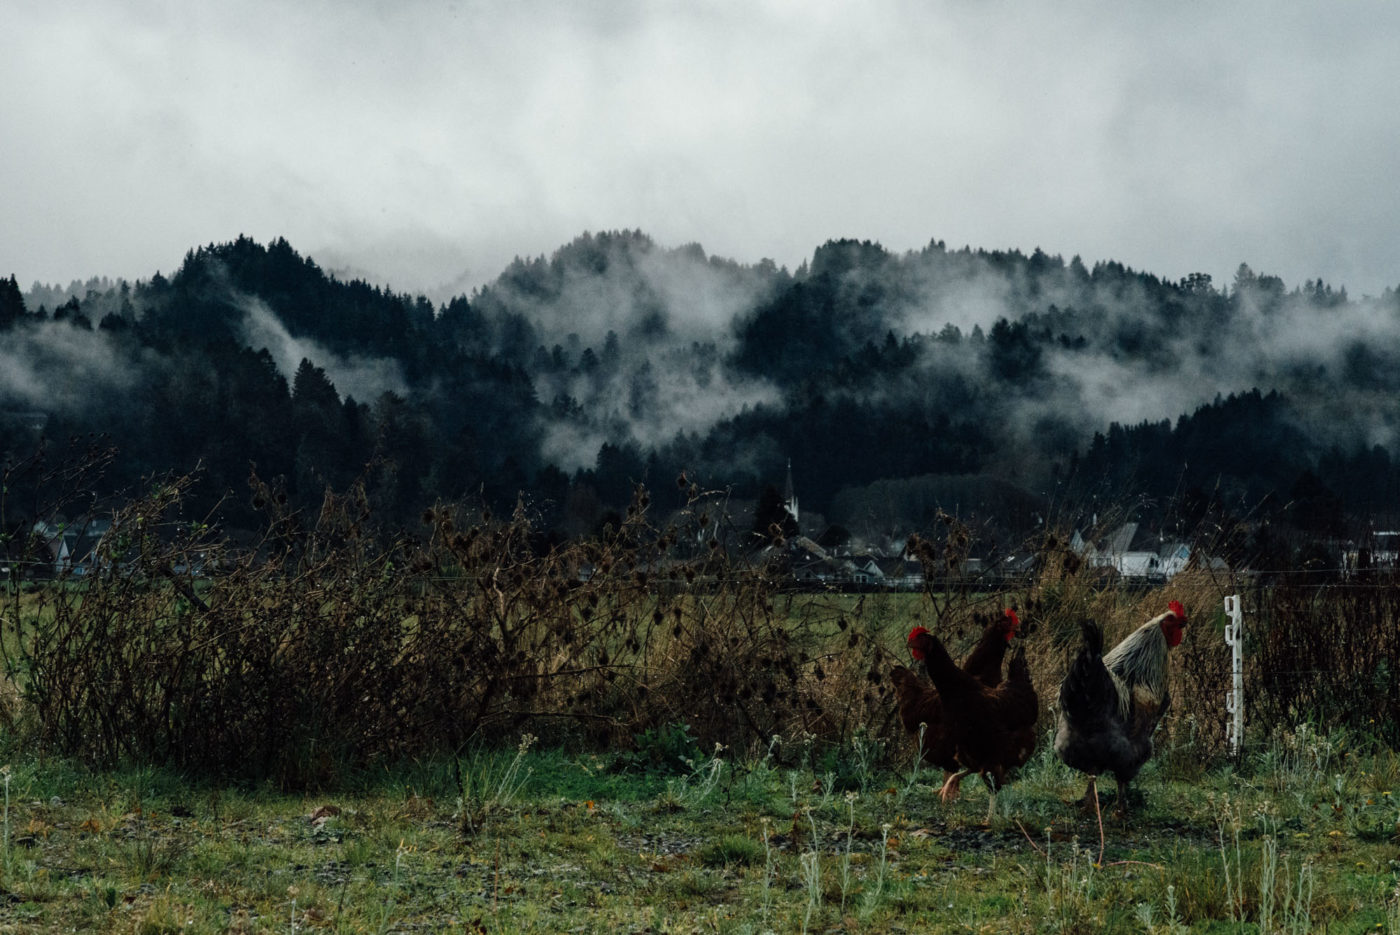 roosters run through a field on a foggy, cloudy day